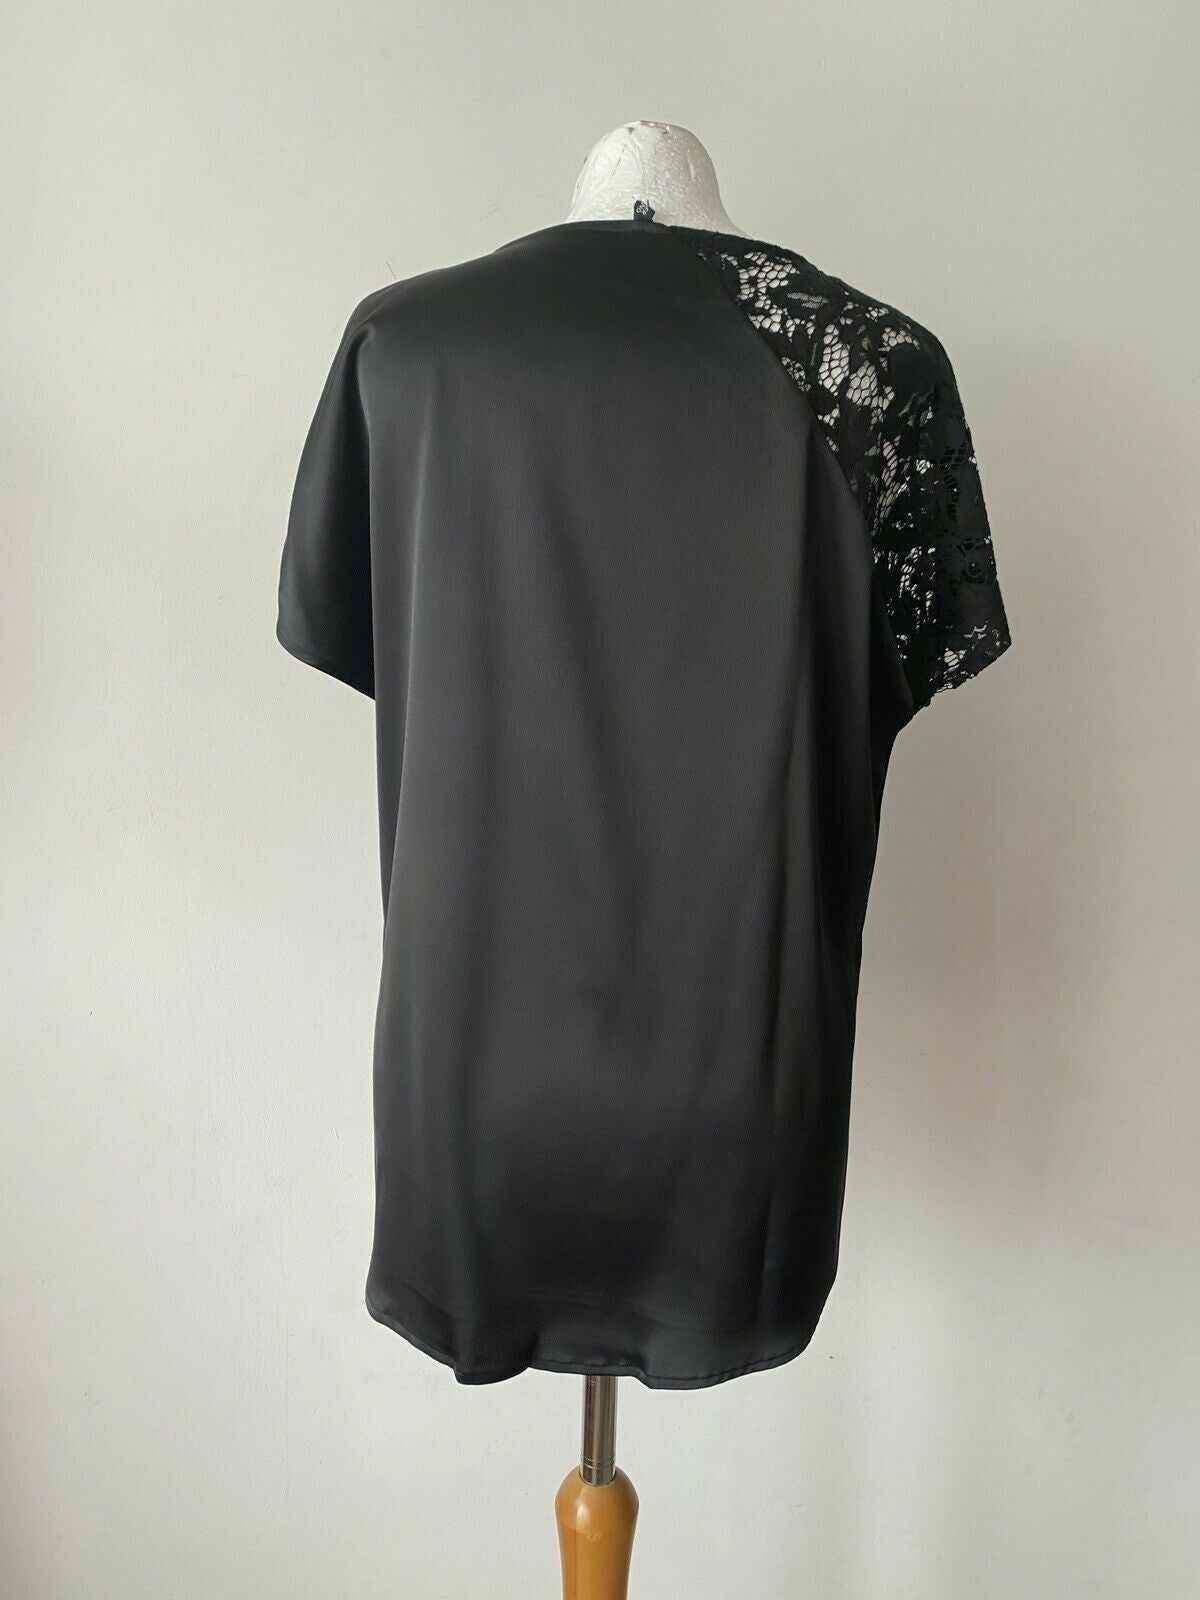 River Island Satin Type Top Contrast Sleeves Size 10 One Side Lace One Side Slit